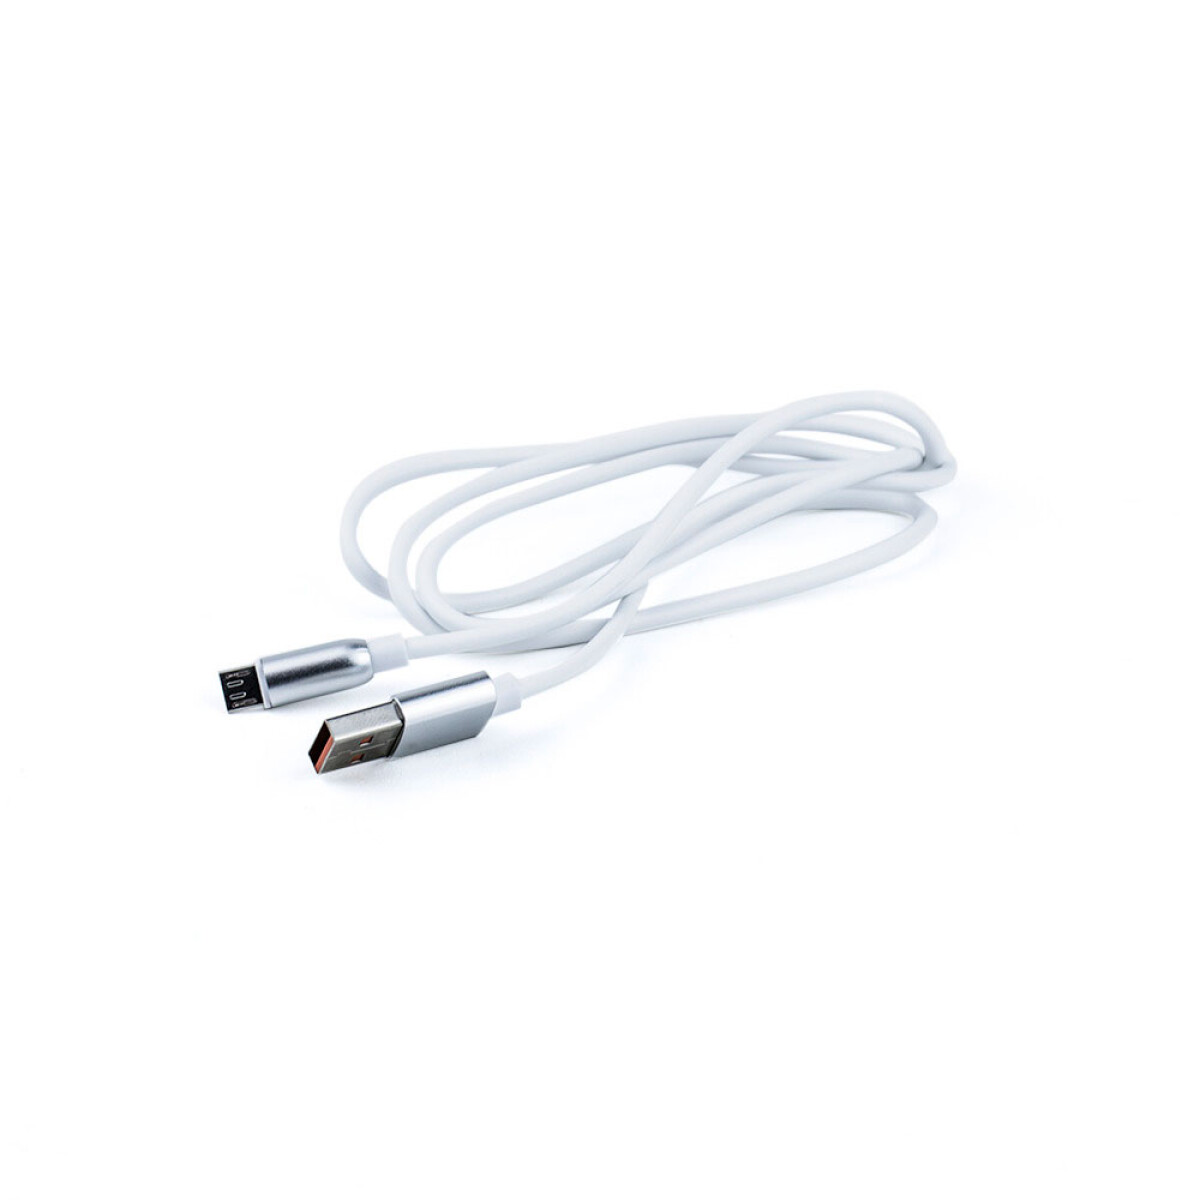 Cable Usb Android En Tubo - Blanco 